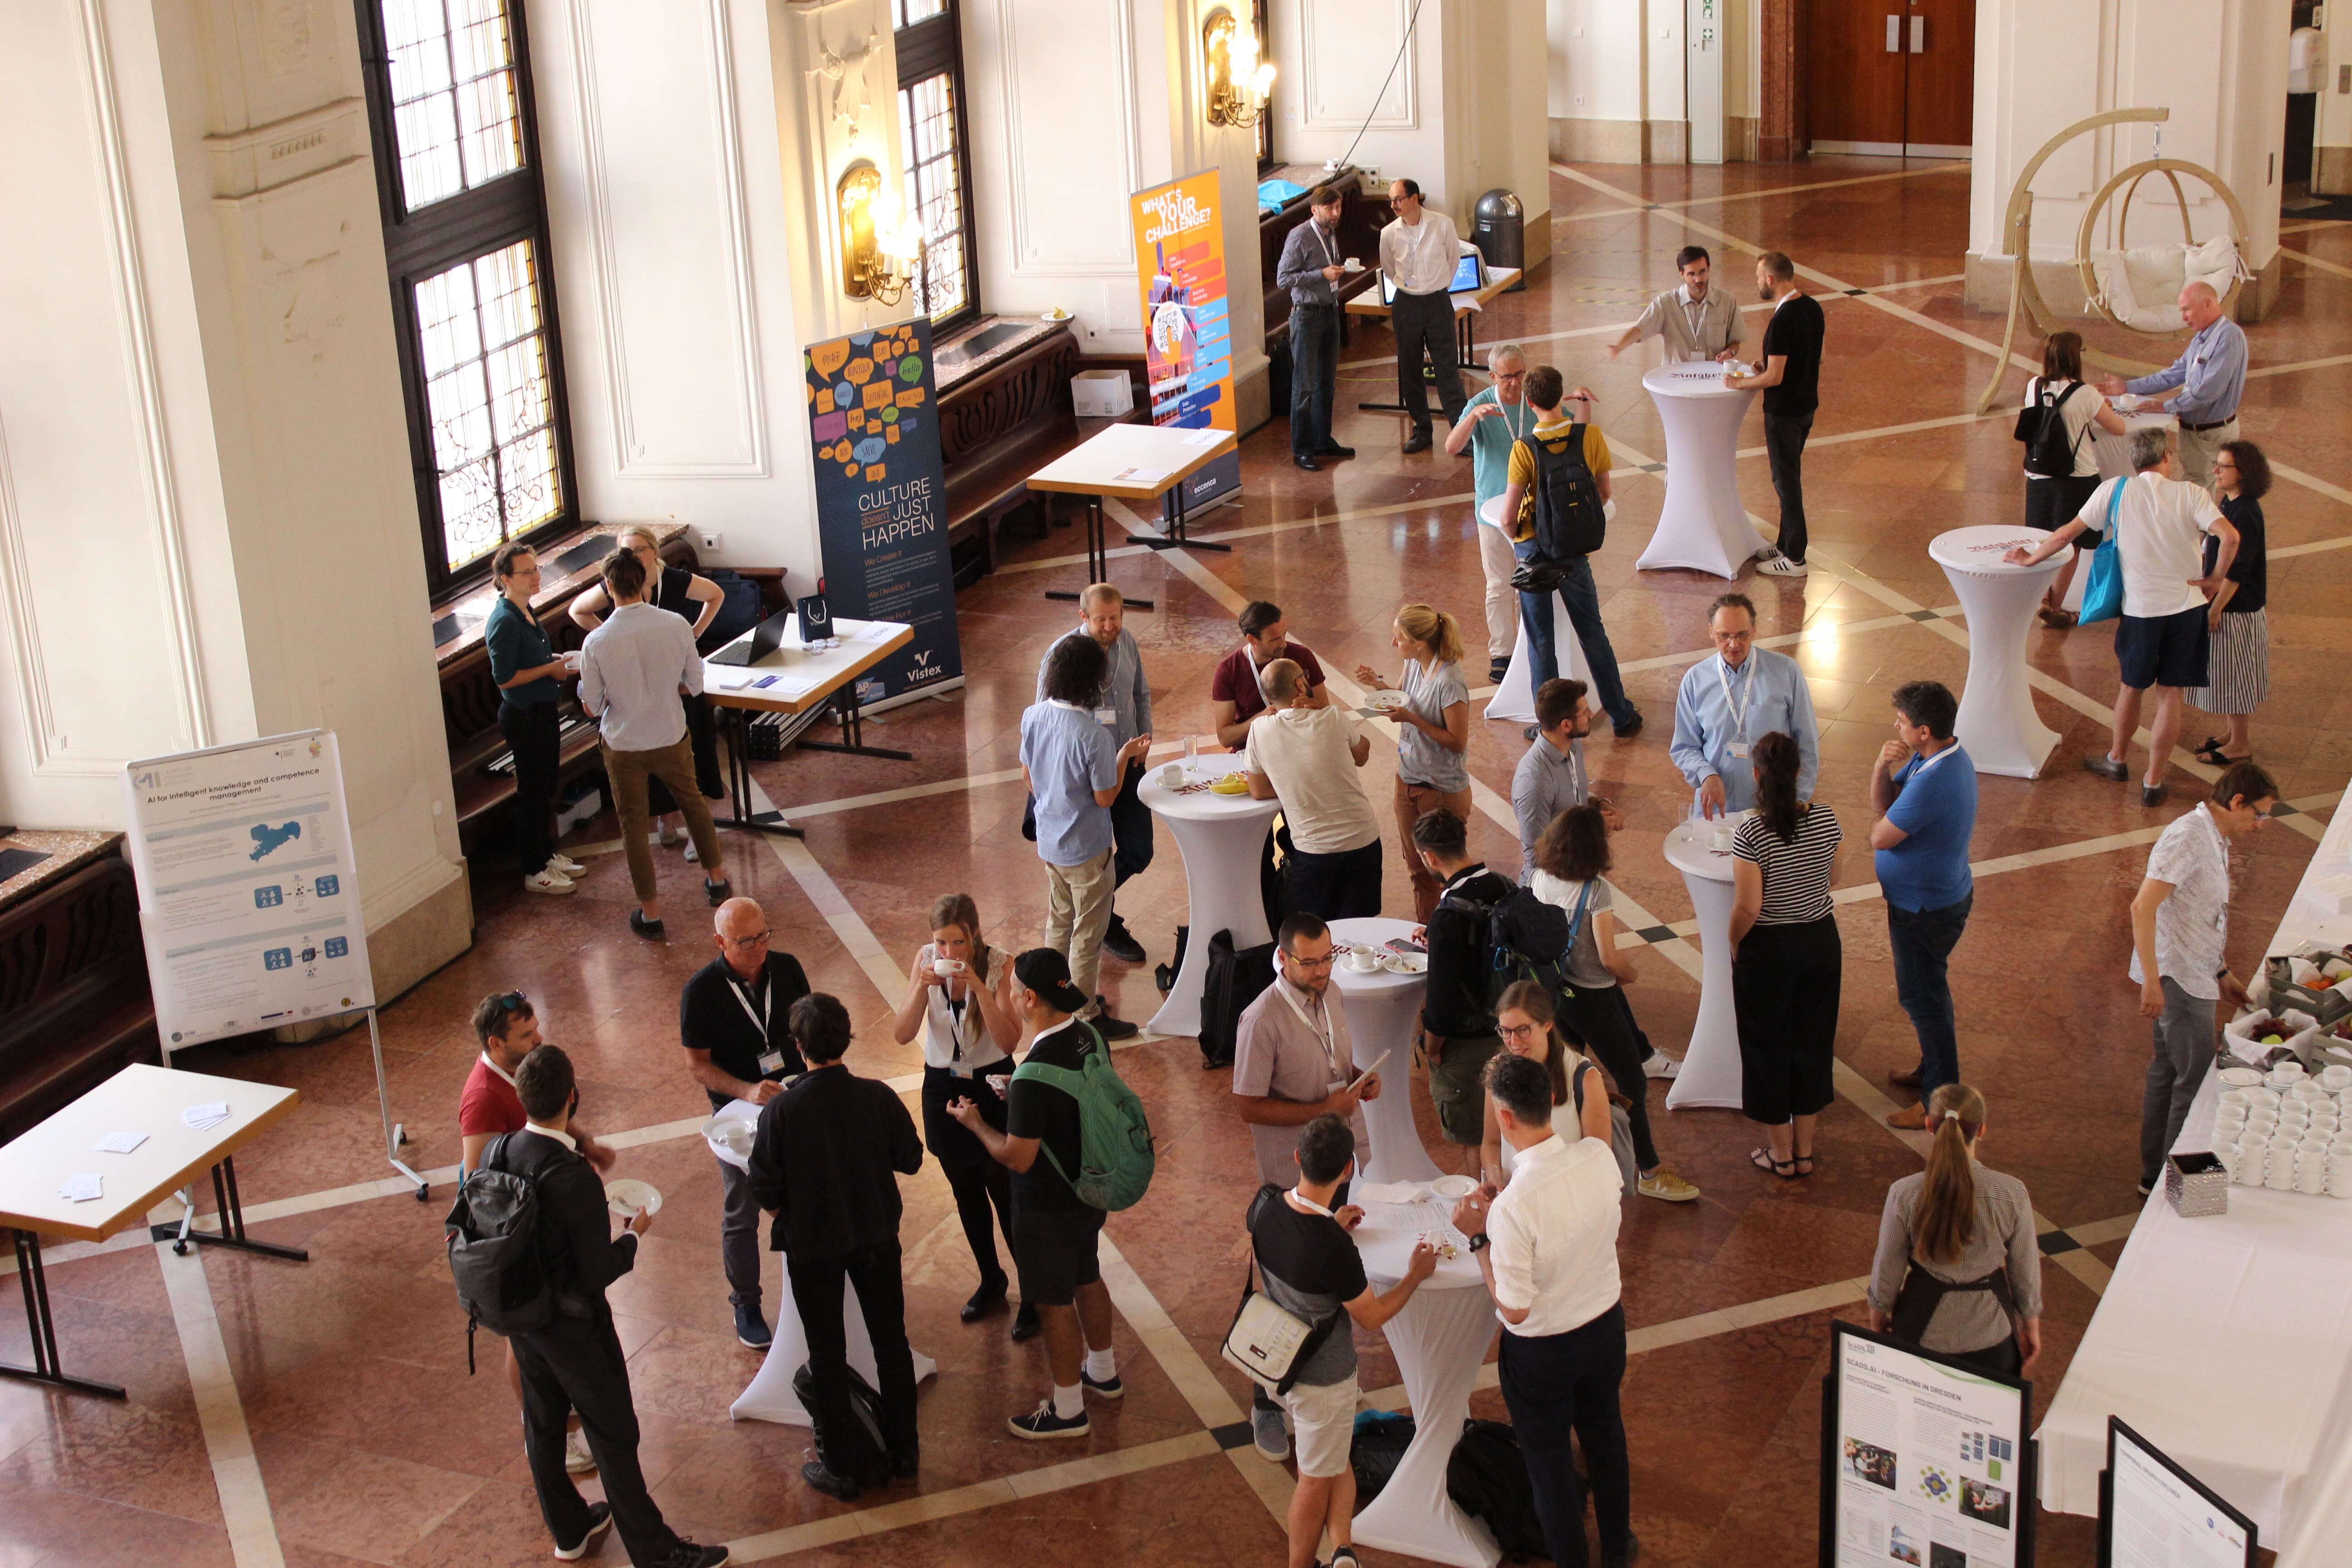 Overview of Wandelhalle and visitors during a coffee break